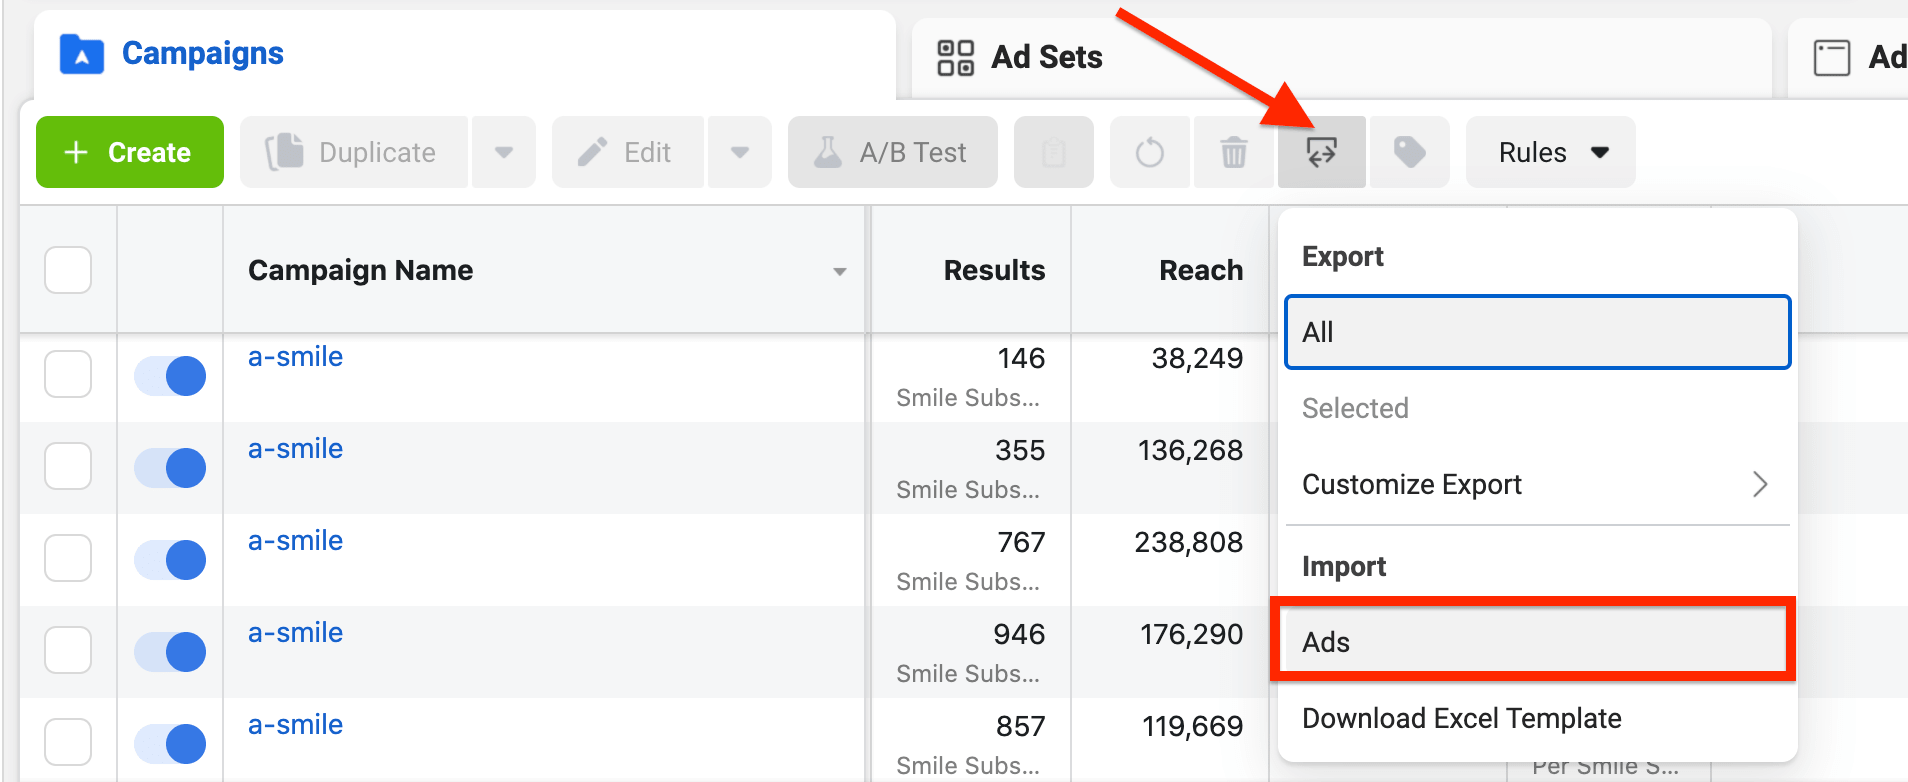 An Alternative Use Case to Export/Import Feature in Facebook Ads Manager